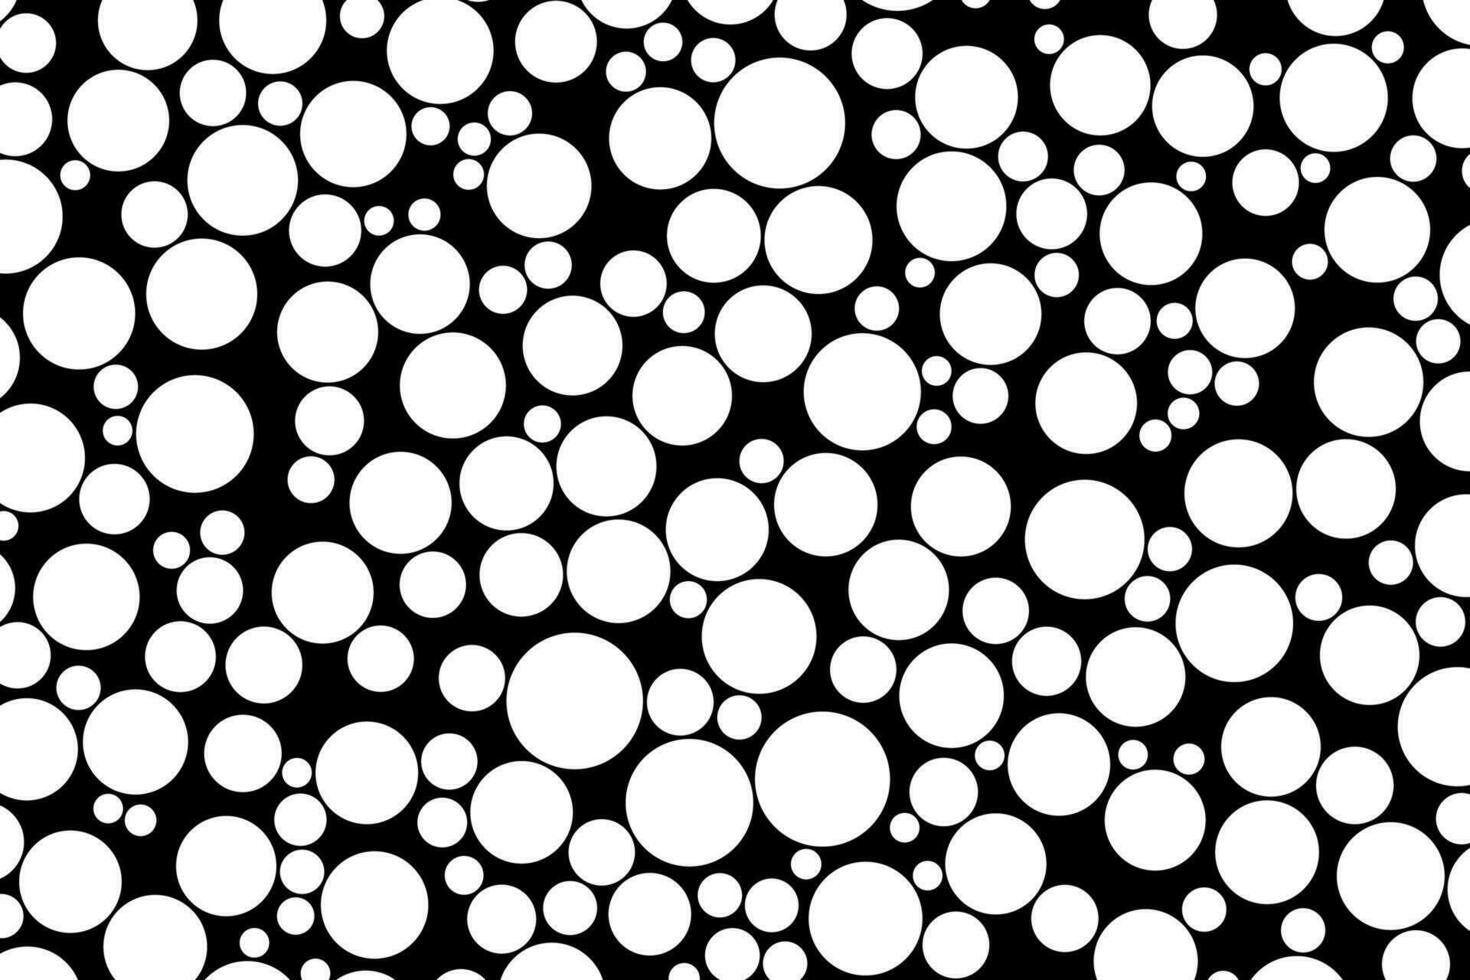 Vector background of white random size circles on black backdrop. Chaotic circle pattern grunge texture.